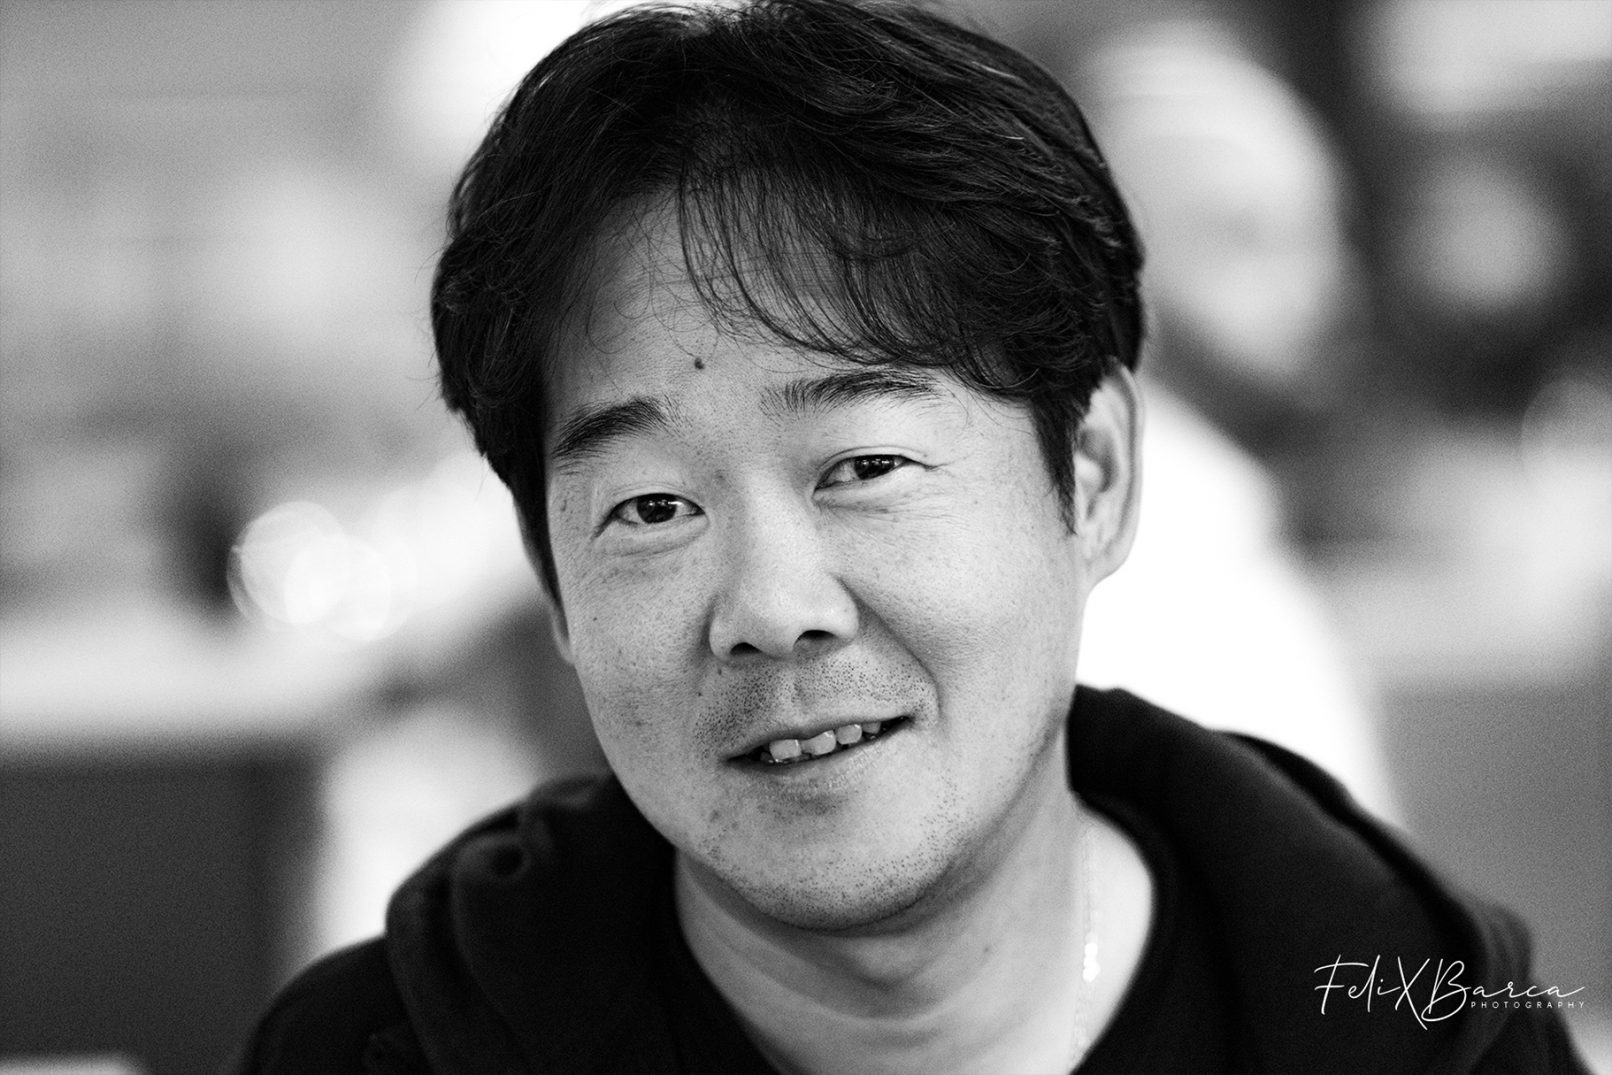 Black and white portrait of Asian man, by Felix Barca